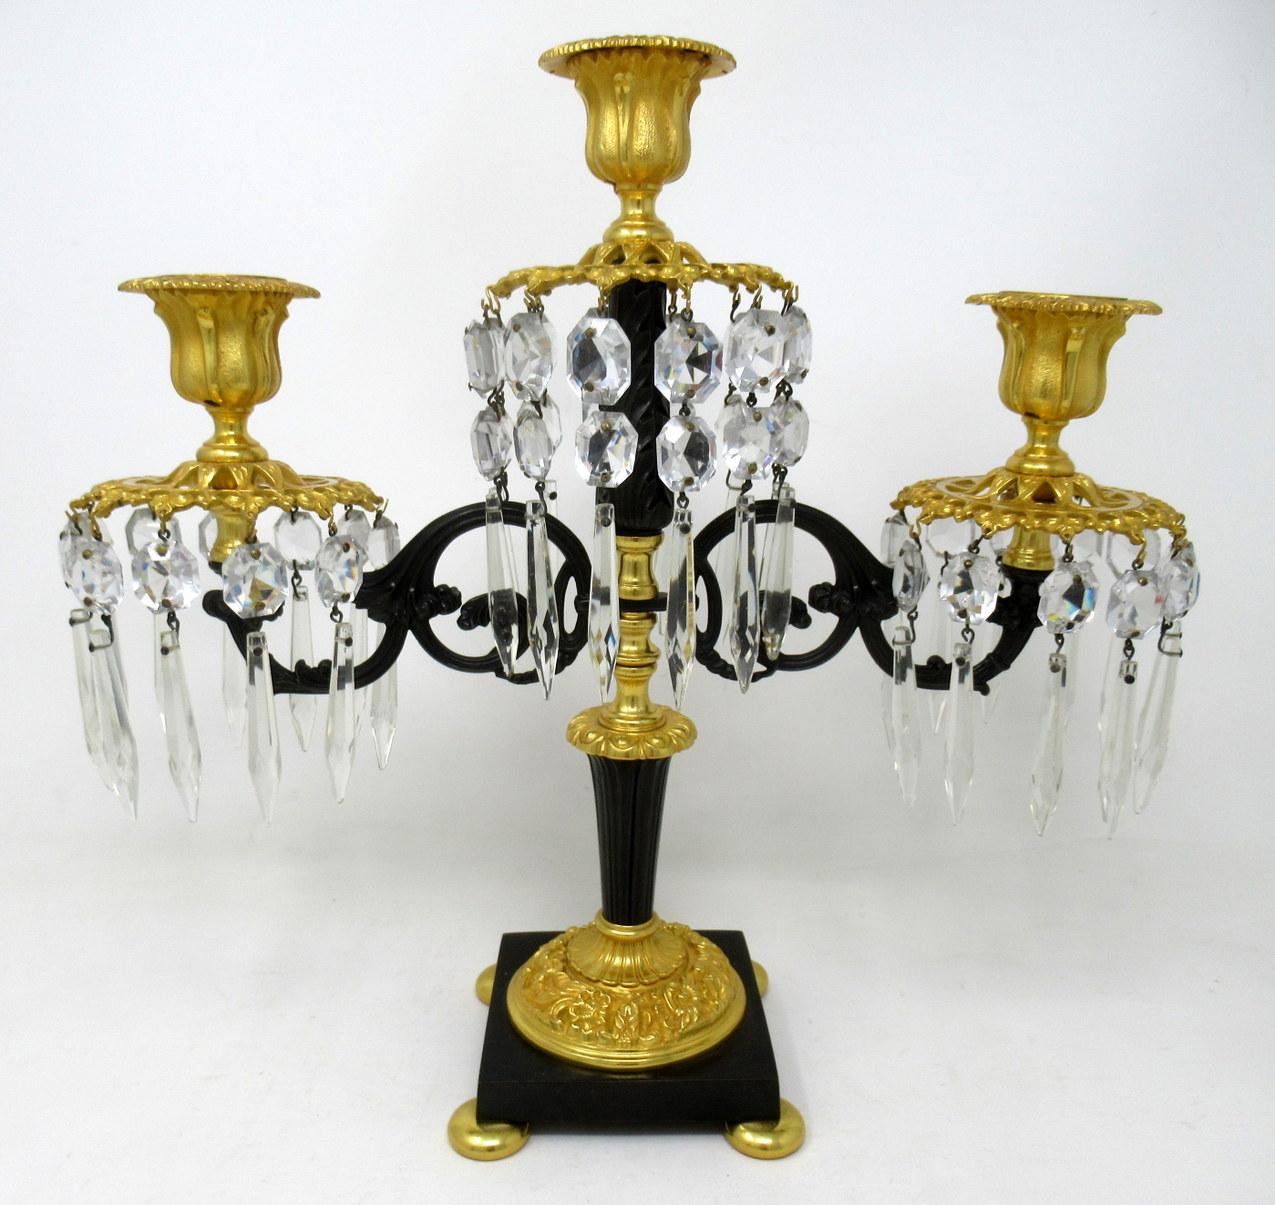 19th Century Antique Ormolu Bronze Dore Crystal Three Branch Candelabra French Lusters, Pair